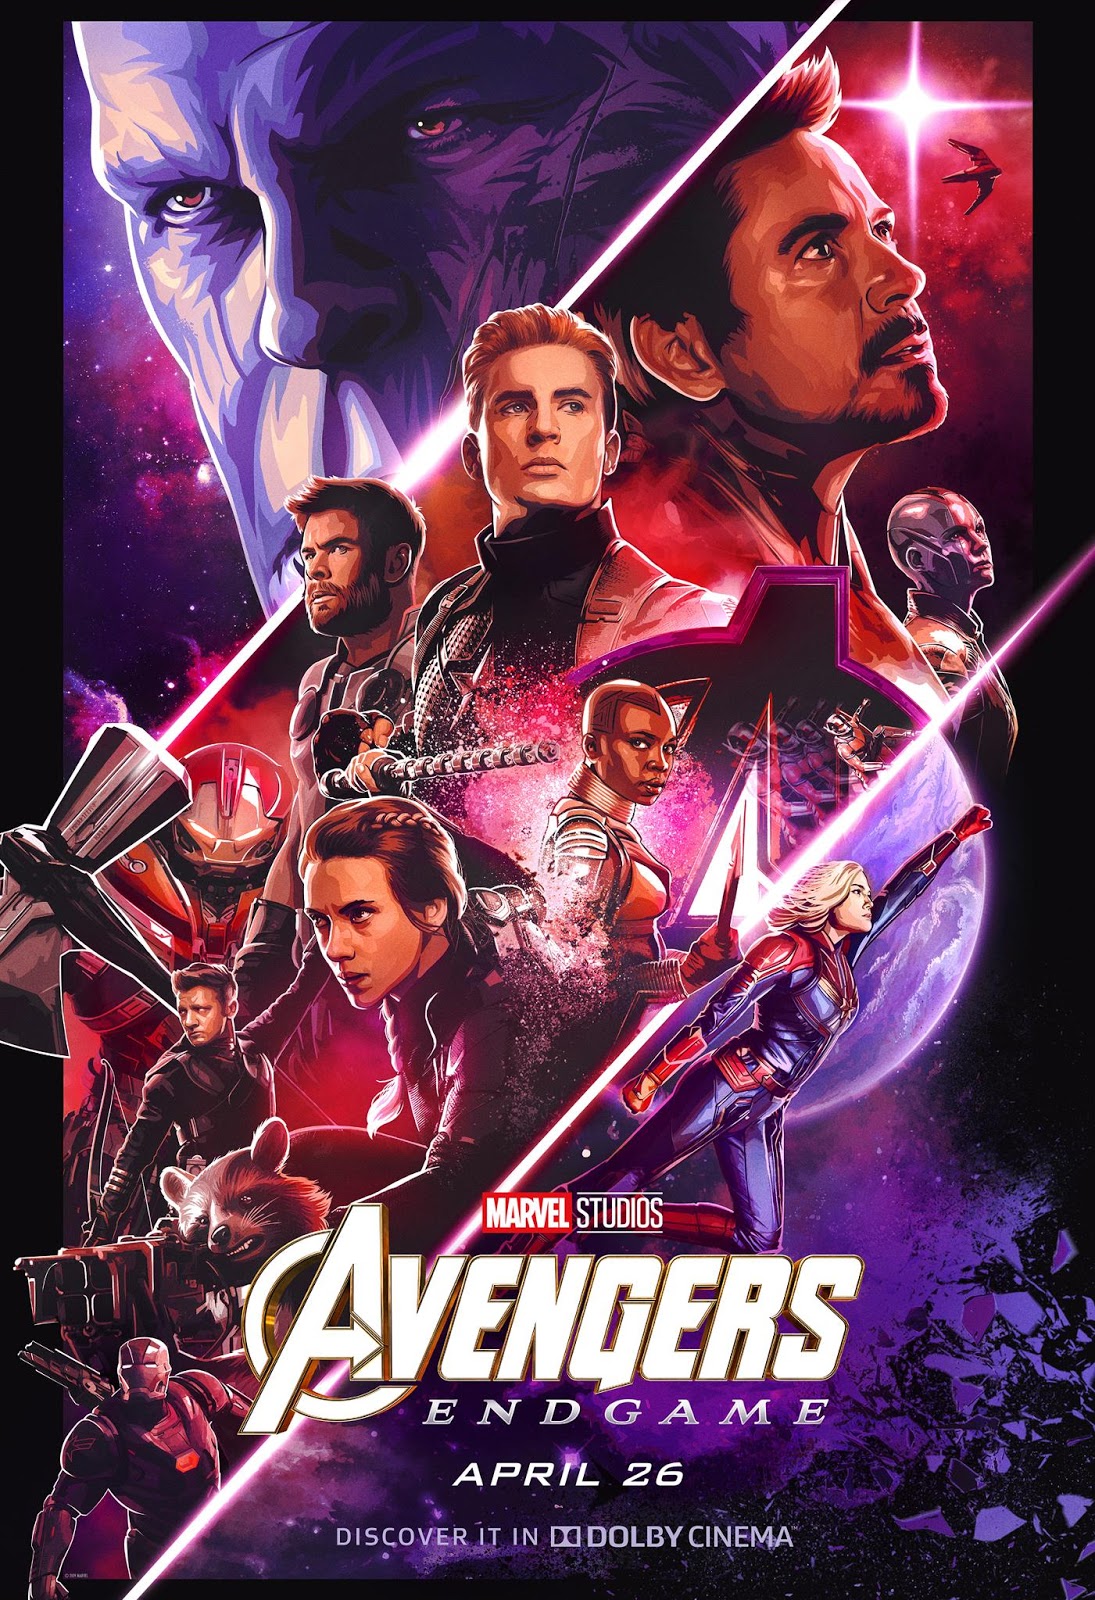 Check Out a Bunch of New AVENGERS: ENDGAME Posters